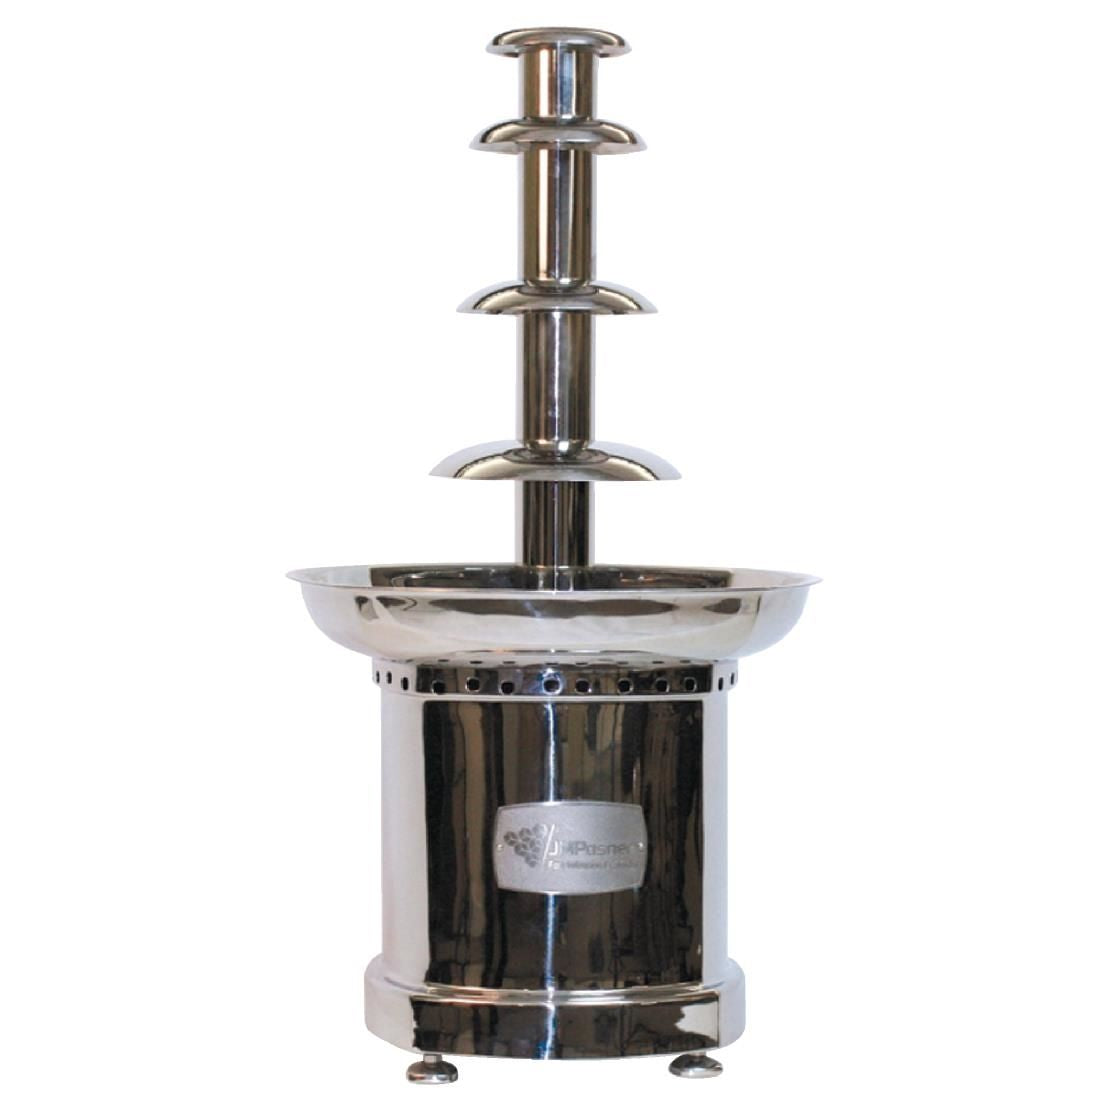 DN674 JM Posner Chocolate Fountain SQ2 JD Catering Equipment Solutions Ltd